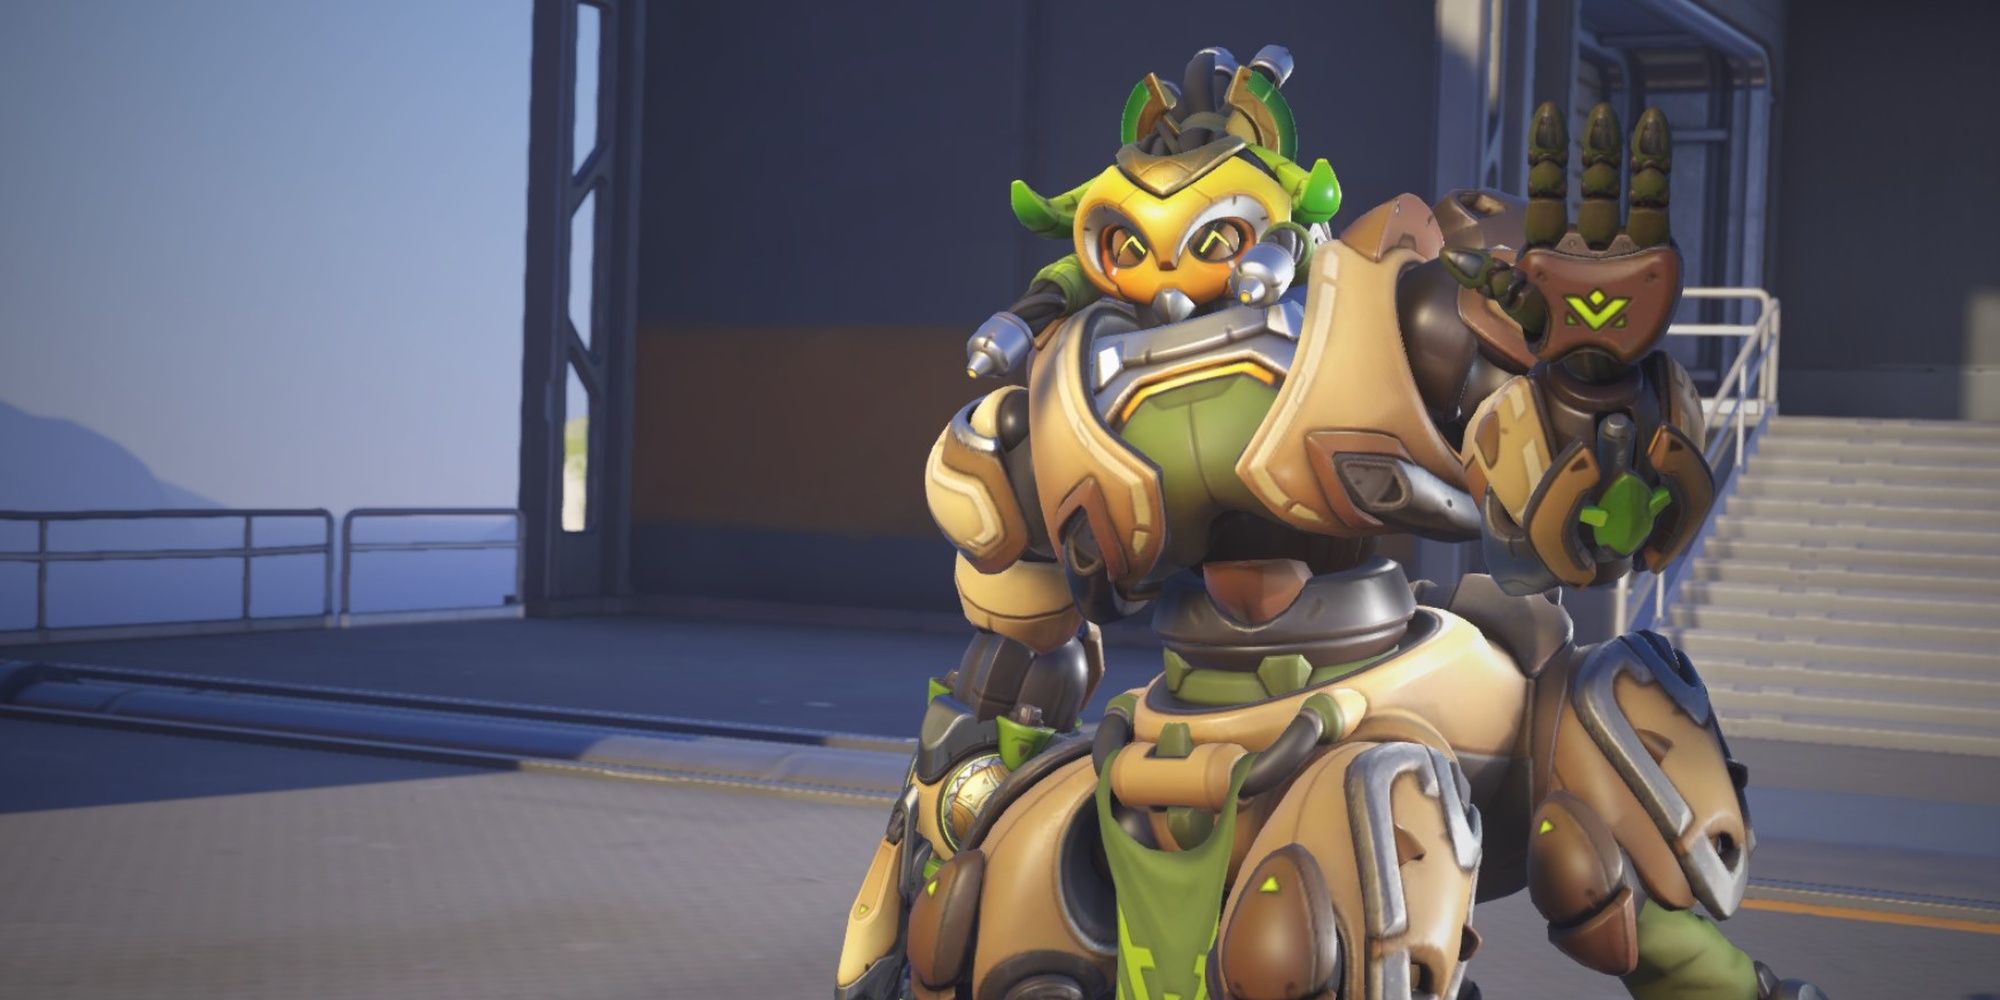 Orisa from Overwatch 2 waves at the camera.